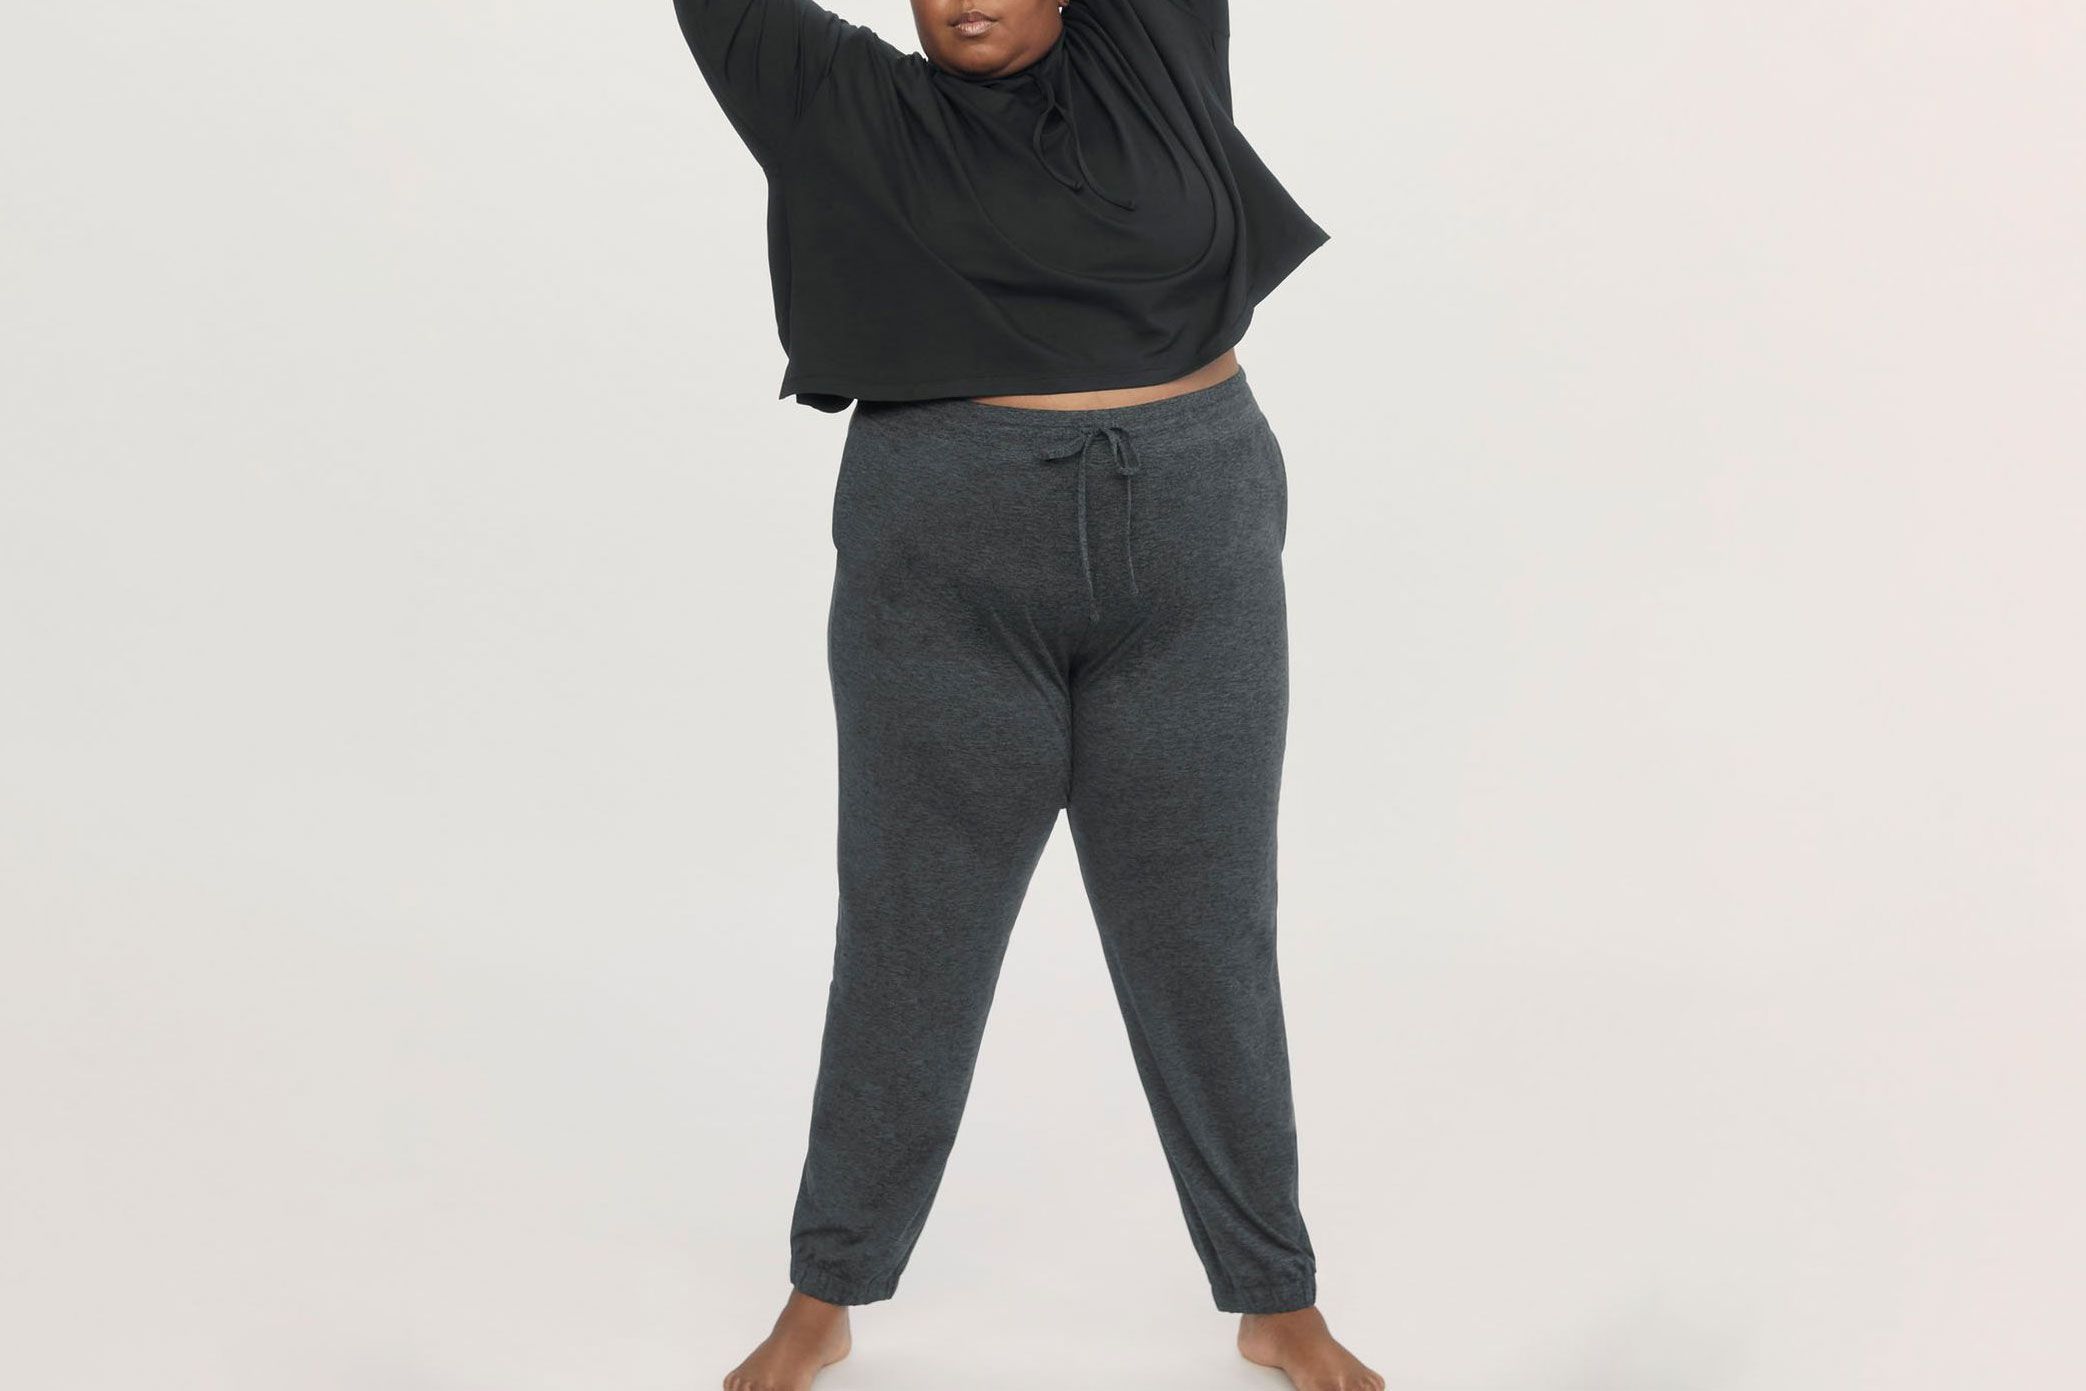 Does Grey Sweatpants Go With A Black Shirt? – solowomen